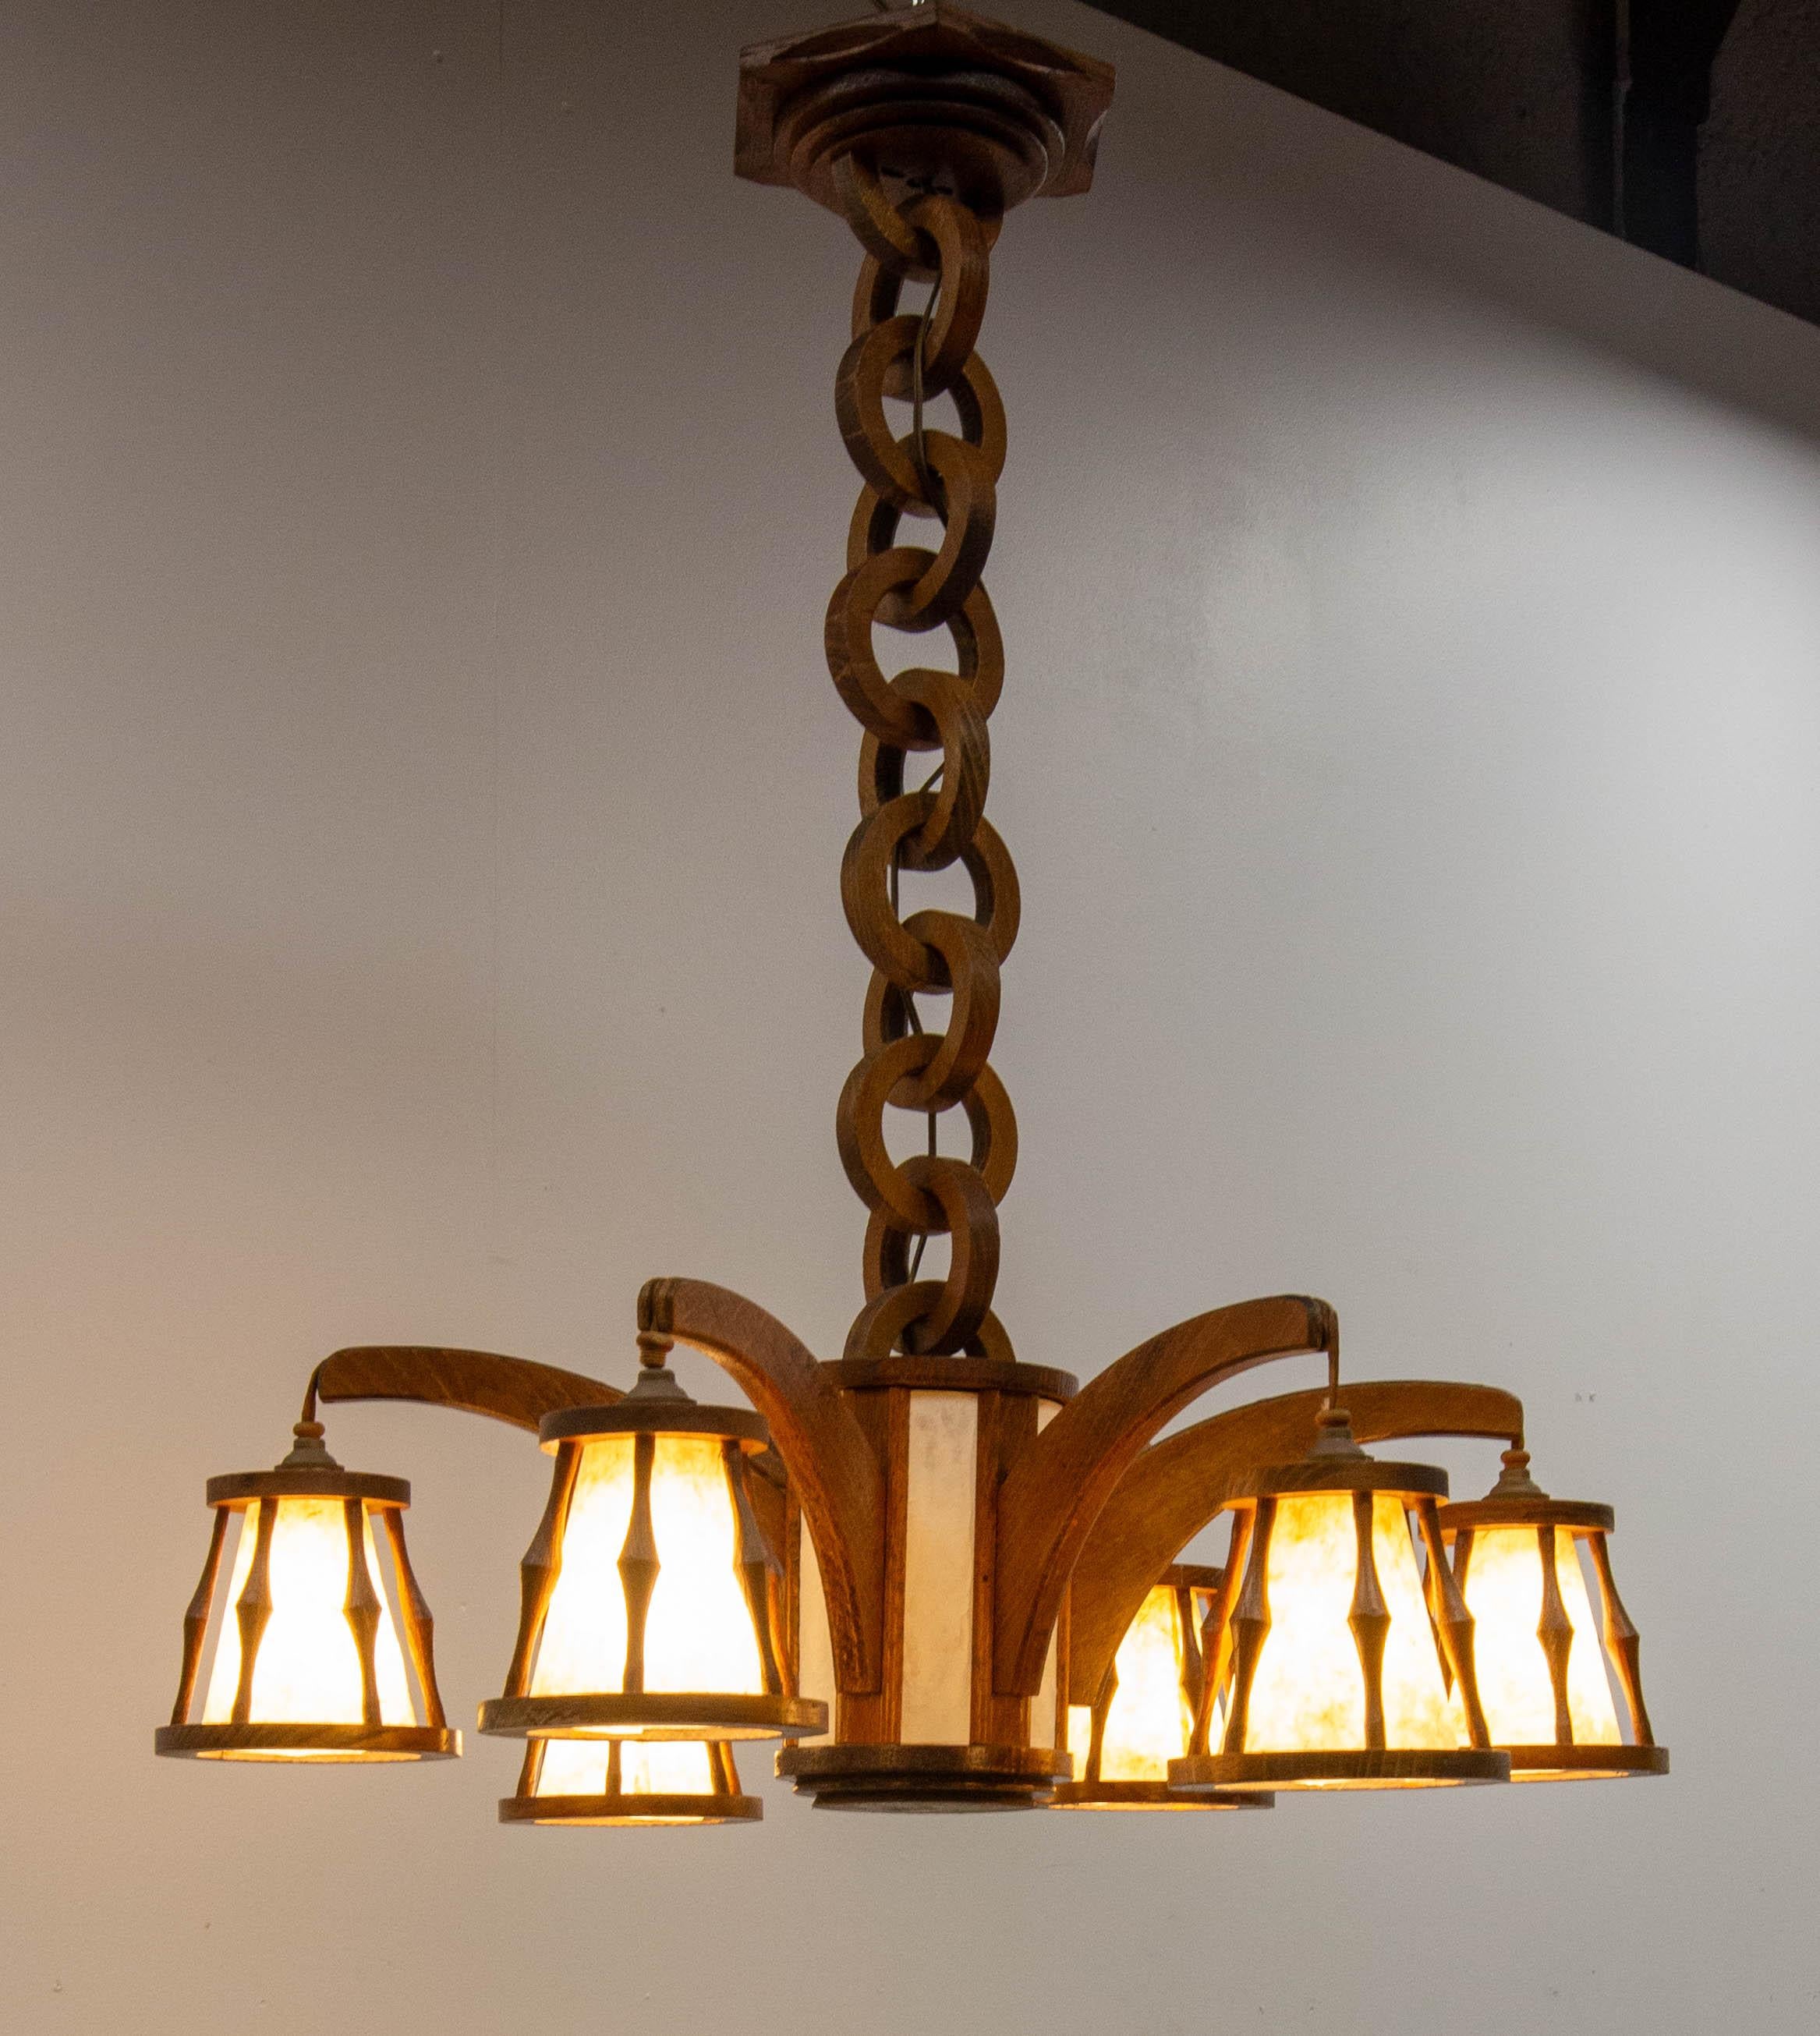 French chandelier or lustre made of beech and with lampshade in parchment paper. 
The lamp shades and the paper central part were recently replaced in a artisanal paper. When the light is on the irregularities of the paper become more visible,